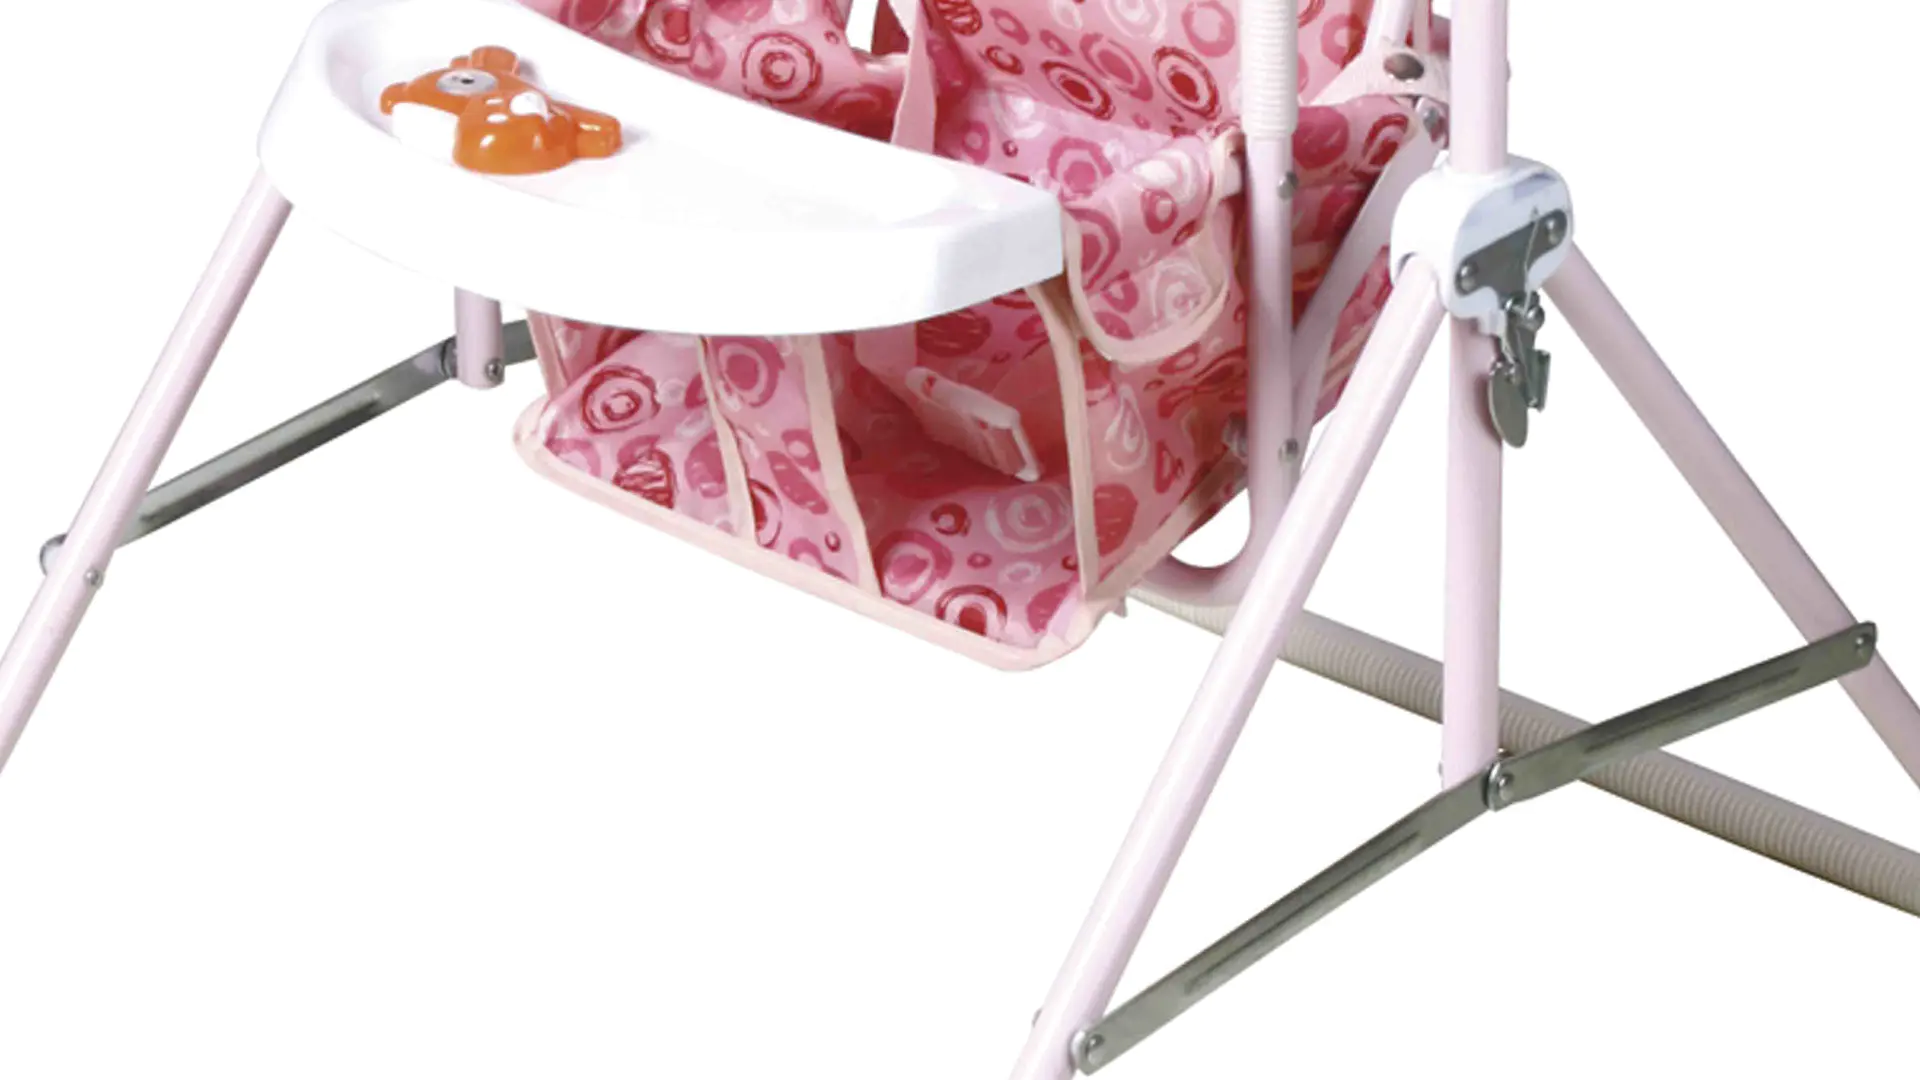 Aoqi cheap baby swings for sale with good price for kids